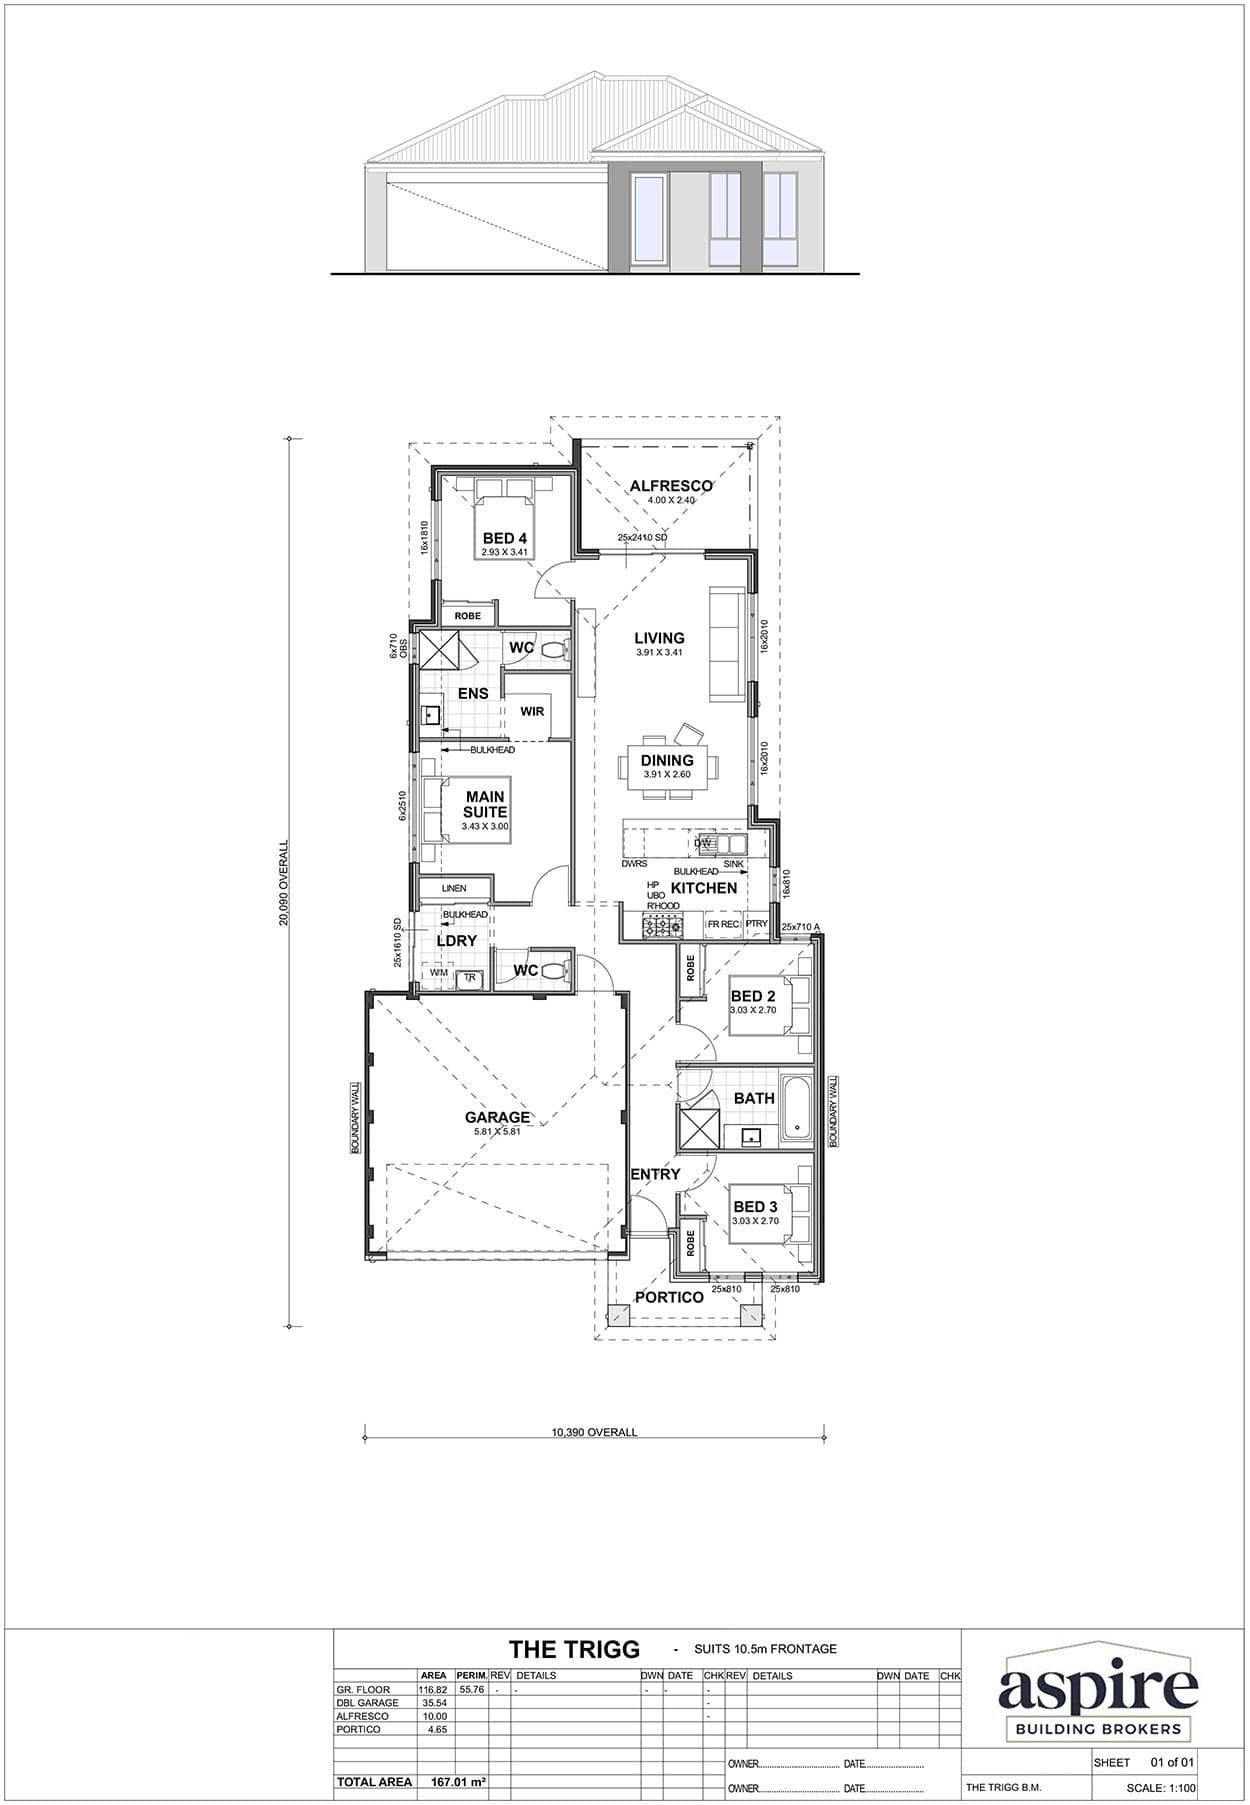 The Trigg Floor Plan - Perth New Build Home Designs. 4 Bedrooms, suited to narrow blocks. Aspire Building Brokers